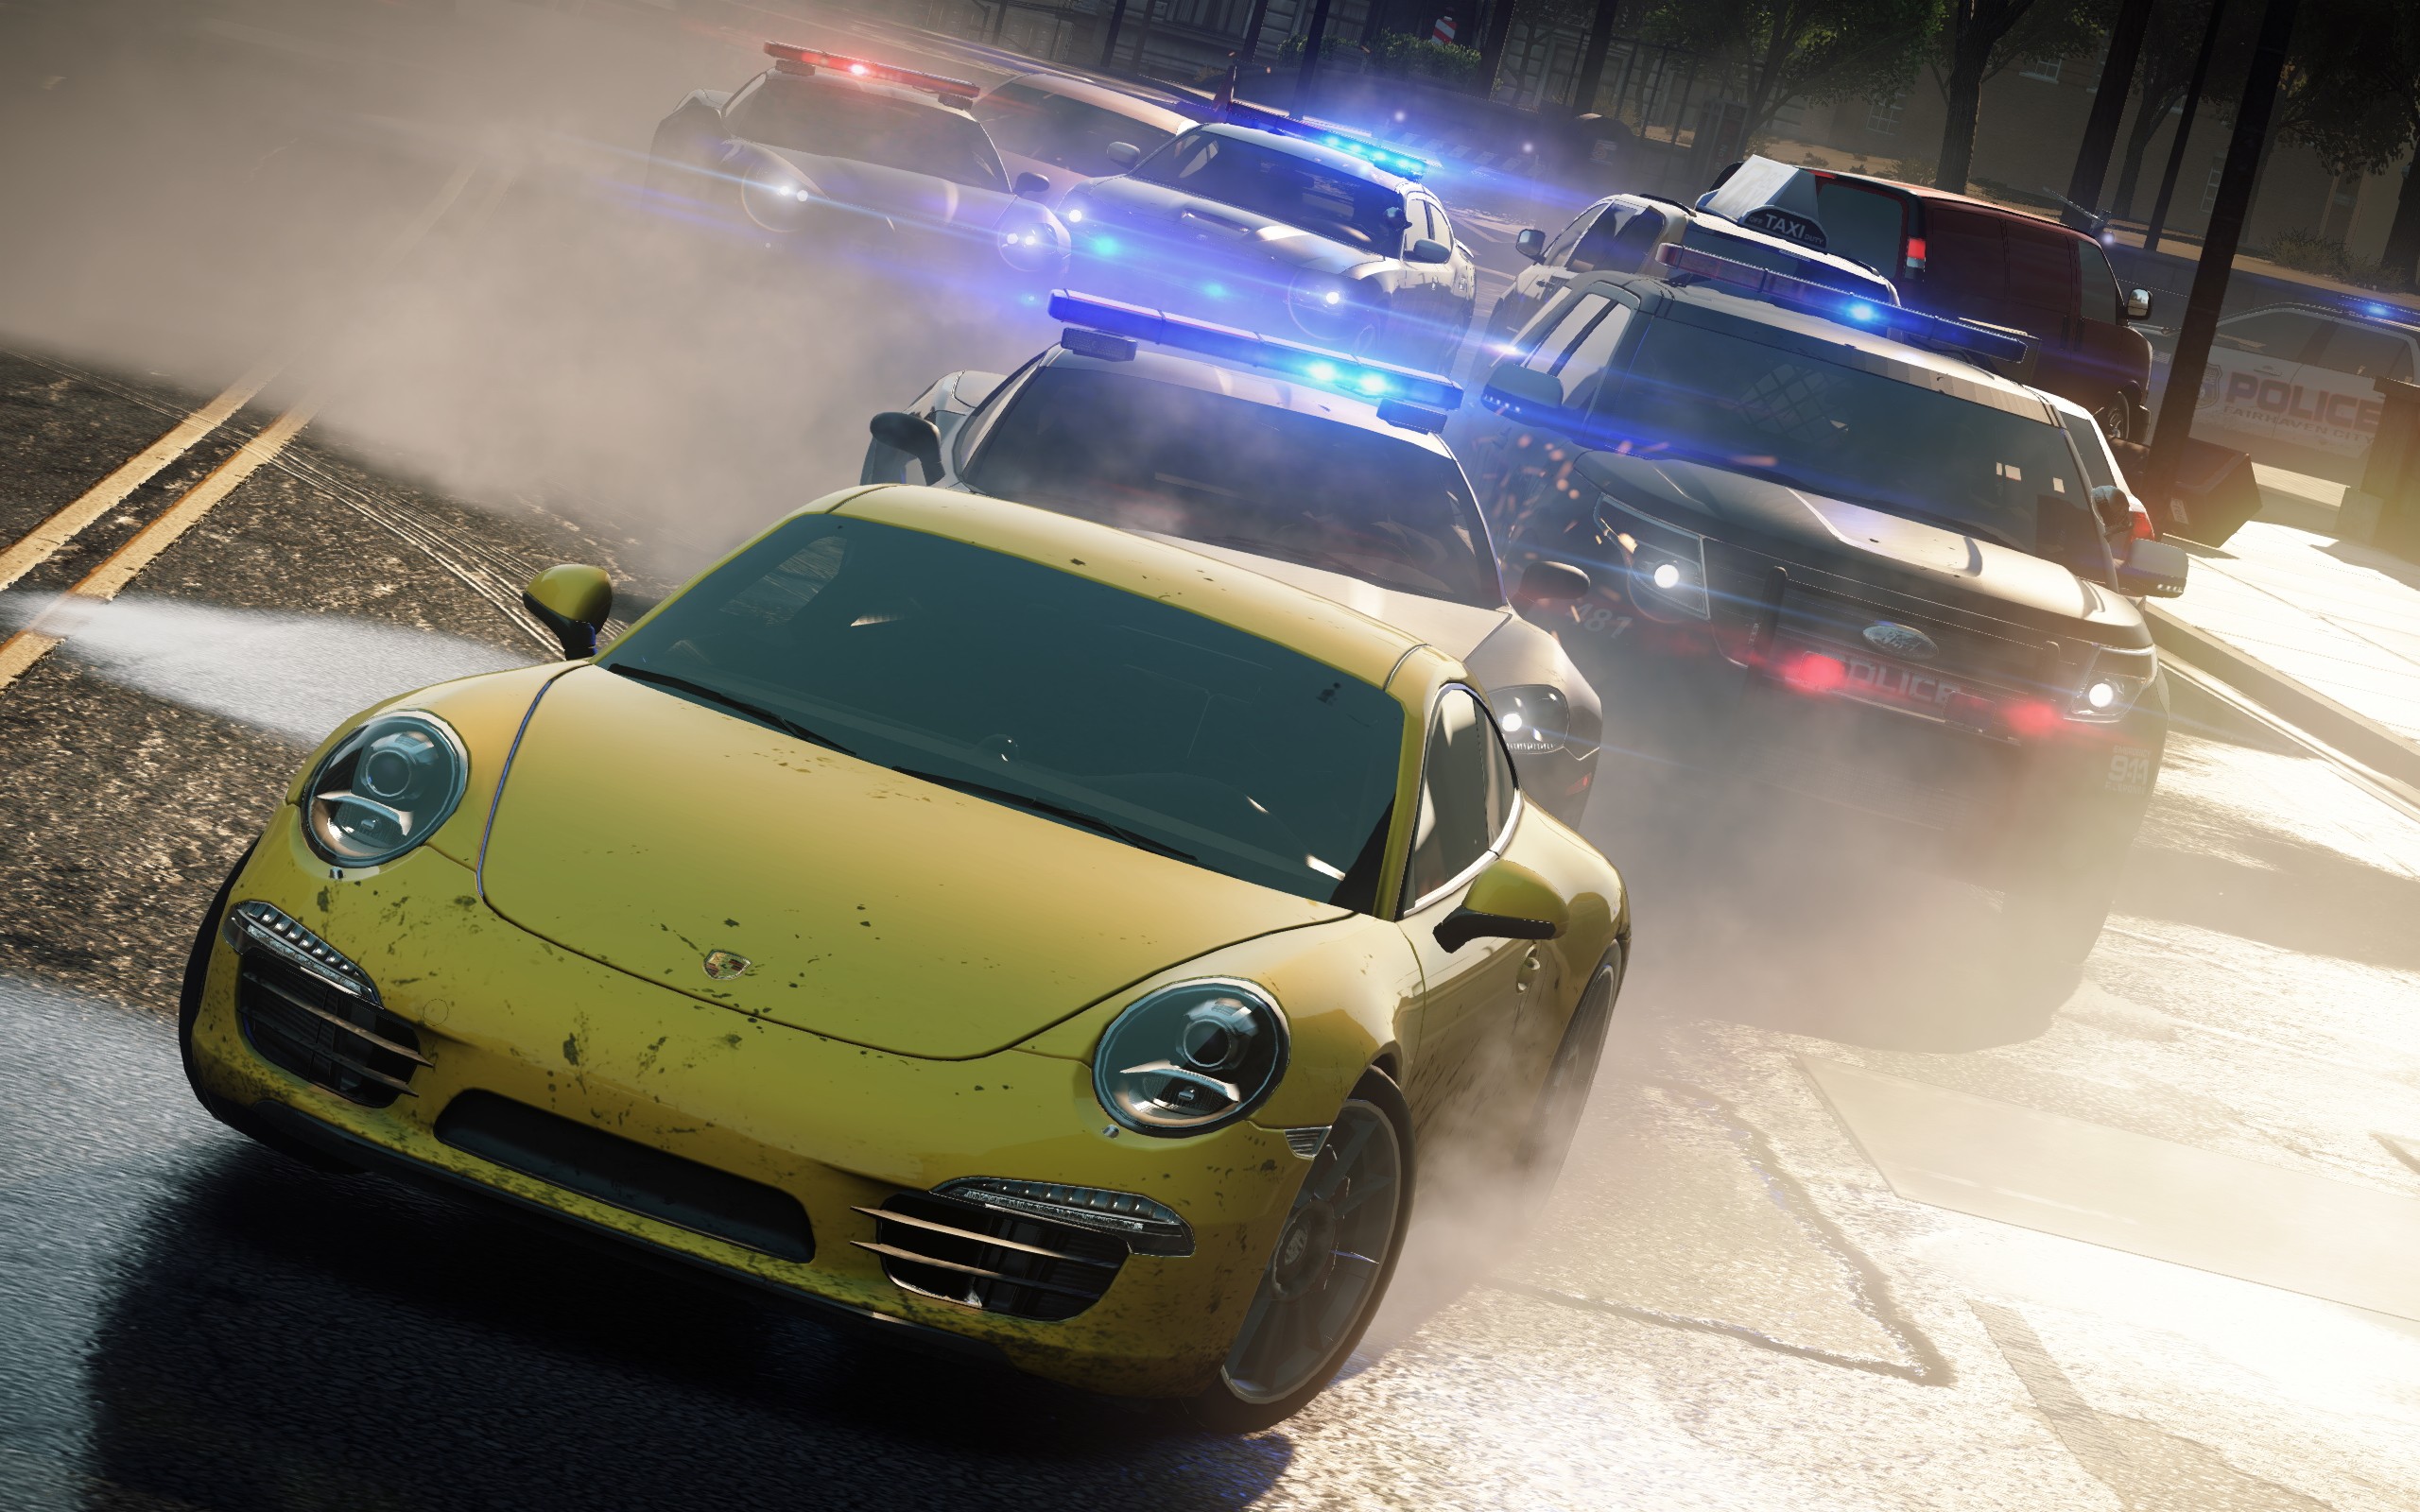 Need for speed wanted game. Most wanted 2012 погоня. Porsche 911 need for Speed. Need for Speed most wanted 2012 погоня. Porsche 911 Carrera s need for Speed most wanted.